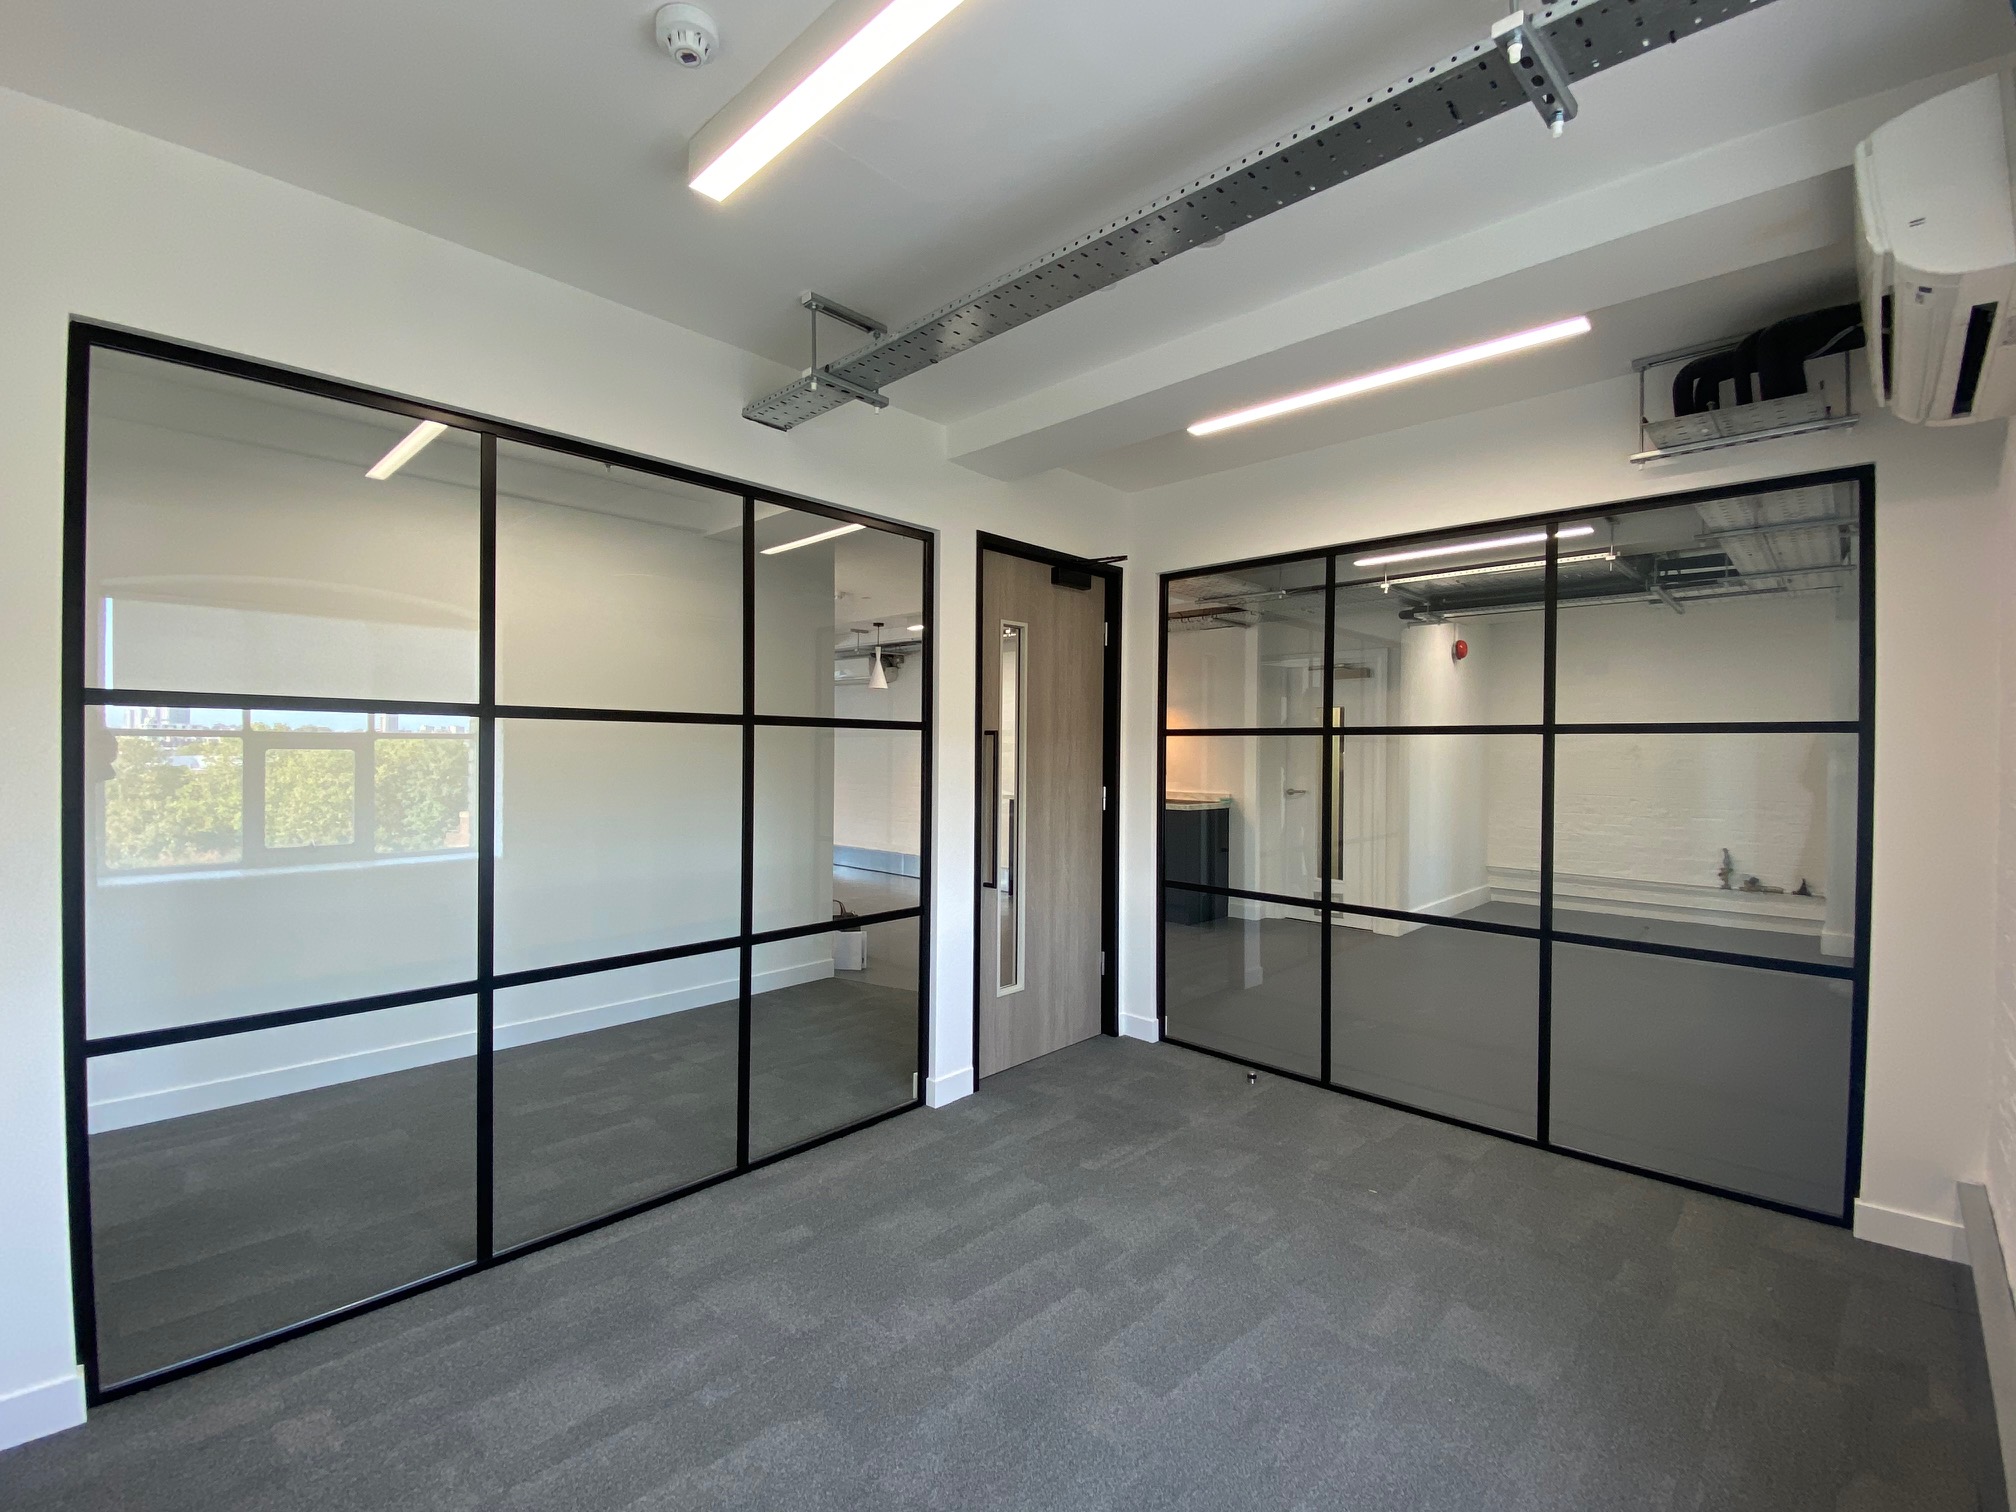 Empty room with glass walls